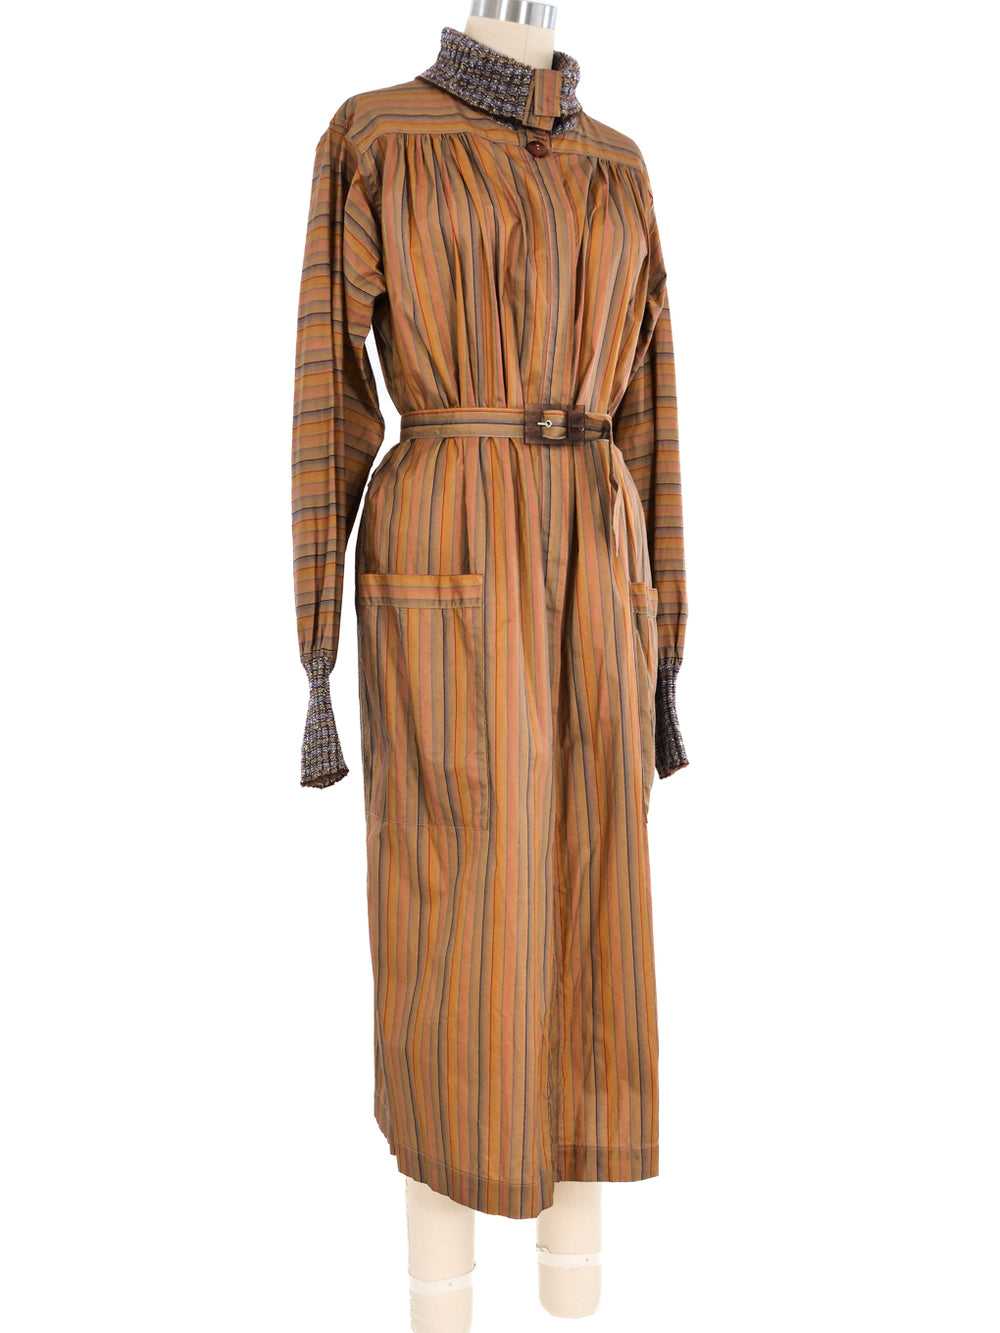 1970's Missoni Striped Belted Coat - image 3